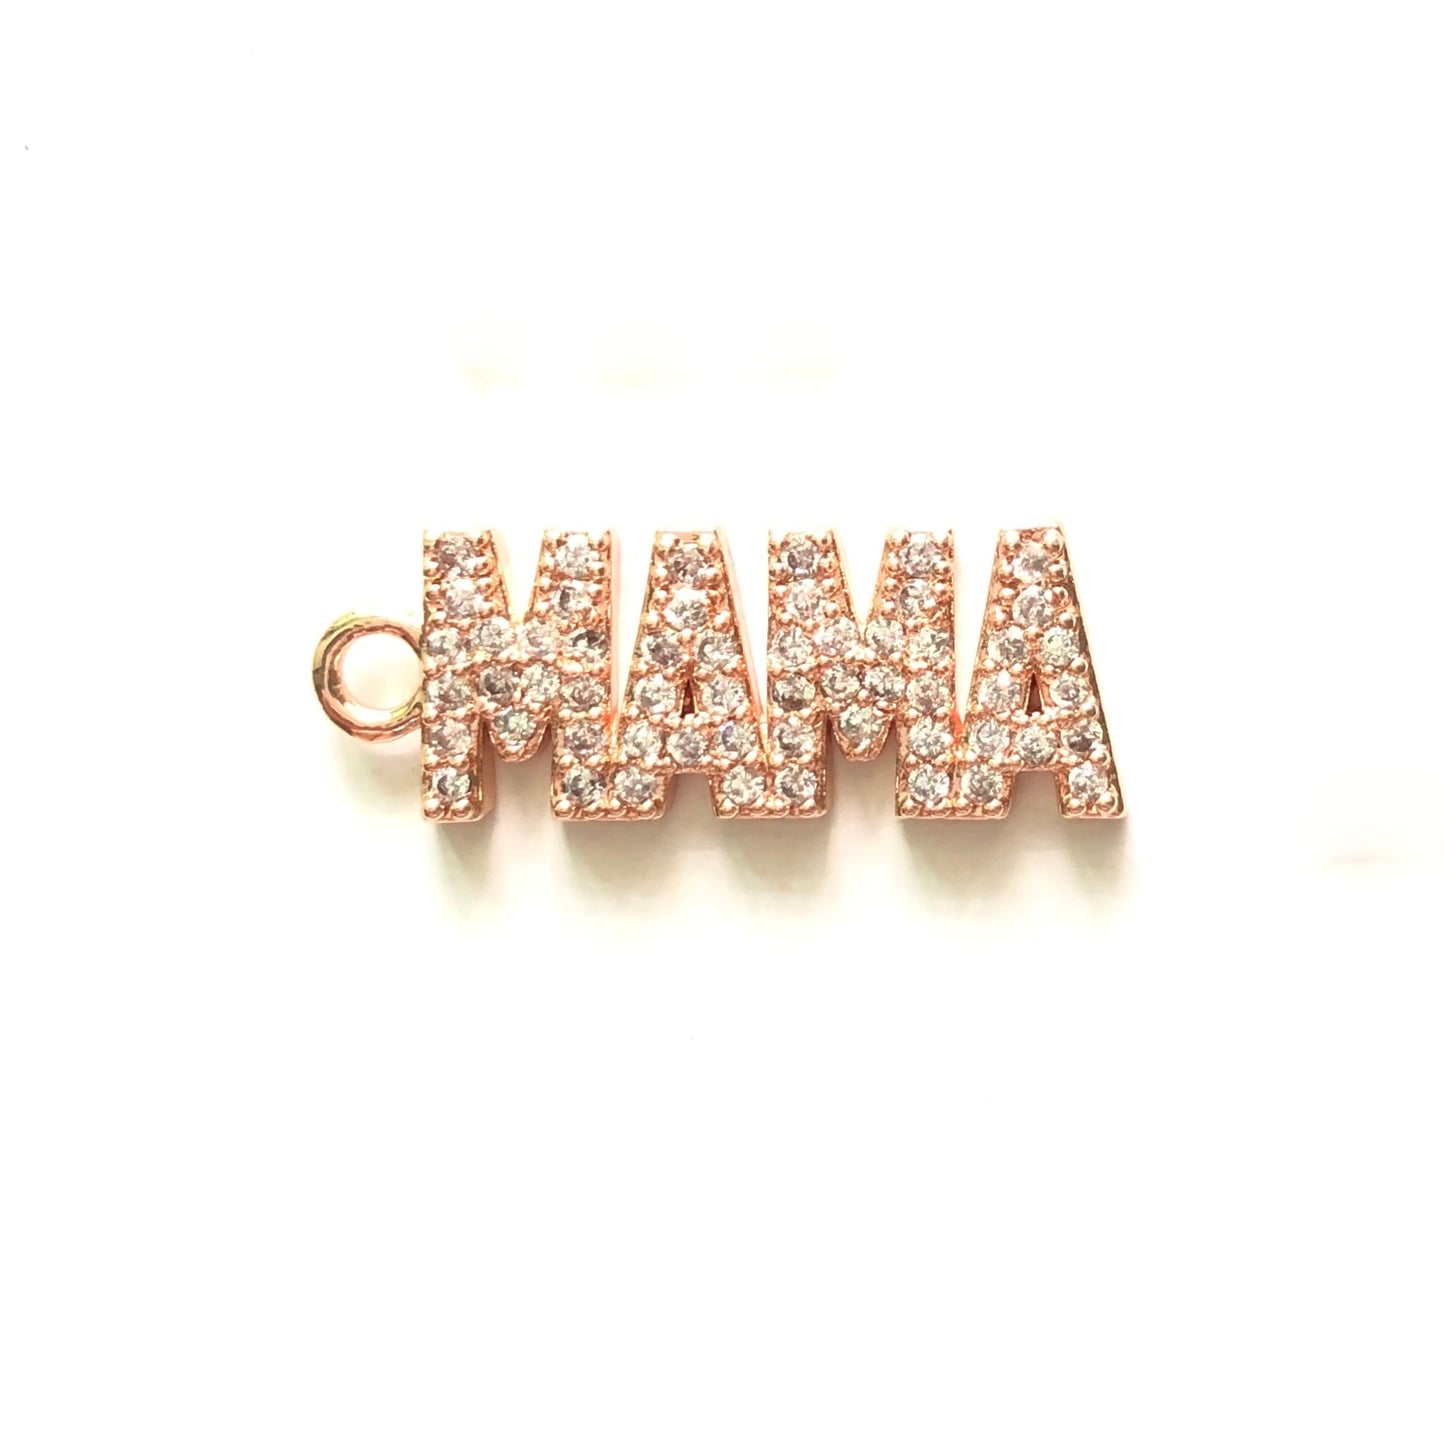 10pcs/lot 31*11mm CZ Paved Mama Charms for Mother's Day Rose Gold CZ Paved Charms Mother's Day Words & Quotes Charms Beads Beyond